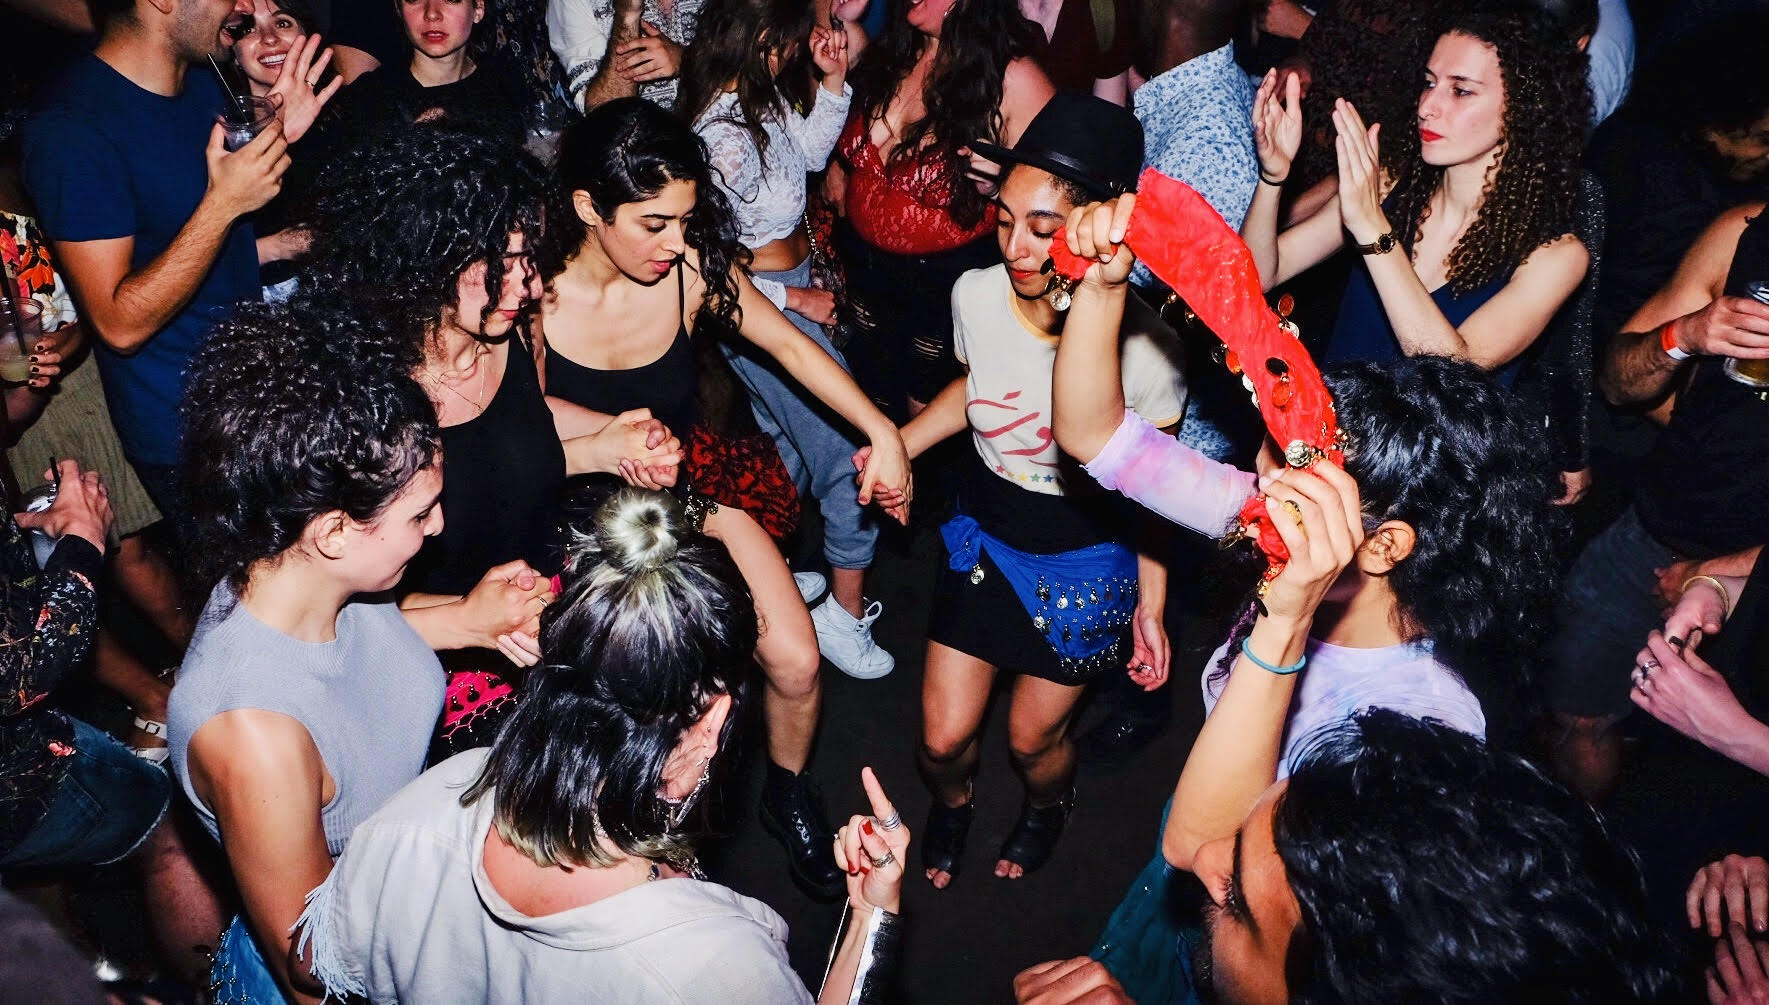 What Does the City’s Nightlife Need to Thrive After the Pandemic?